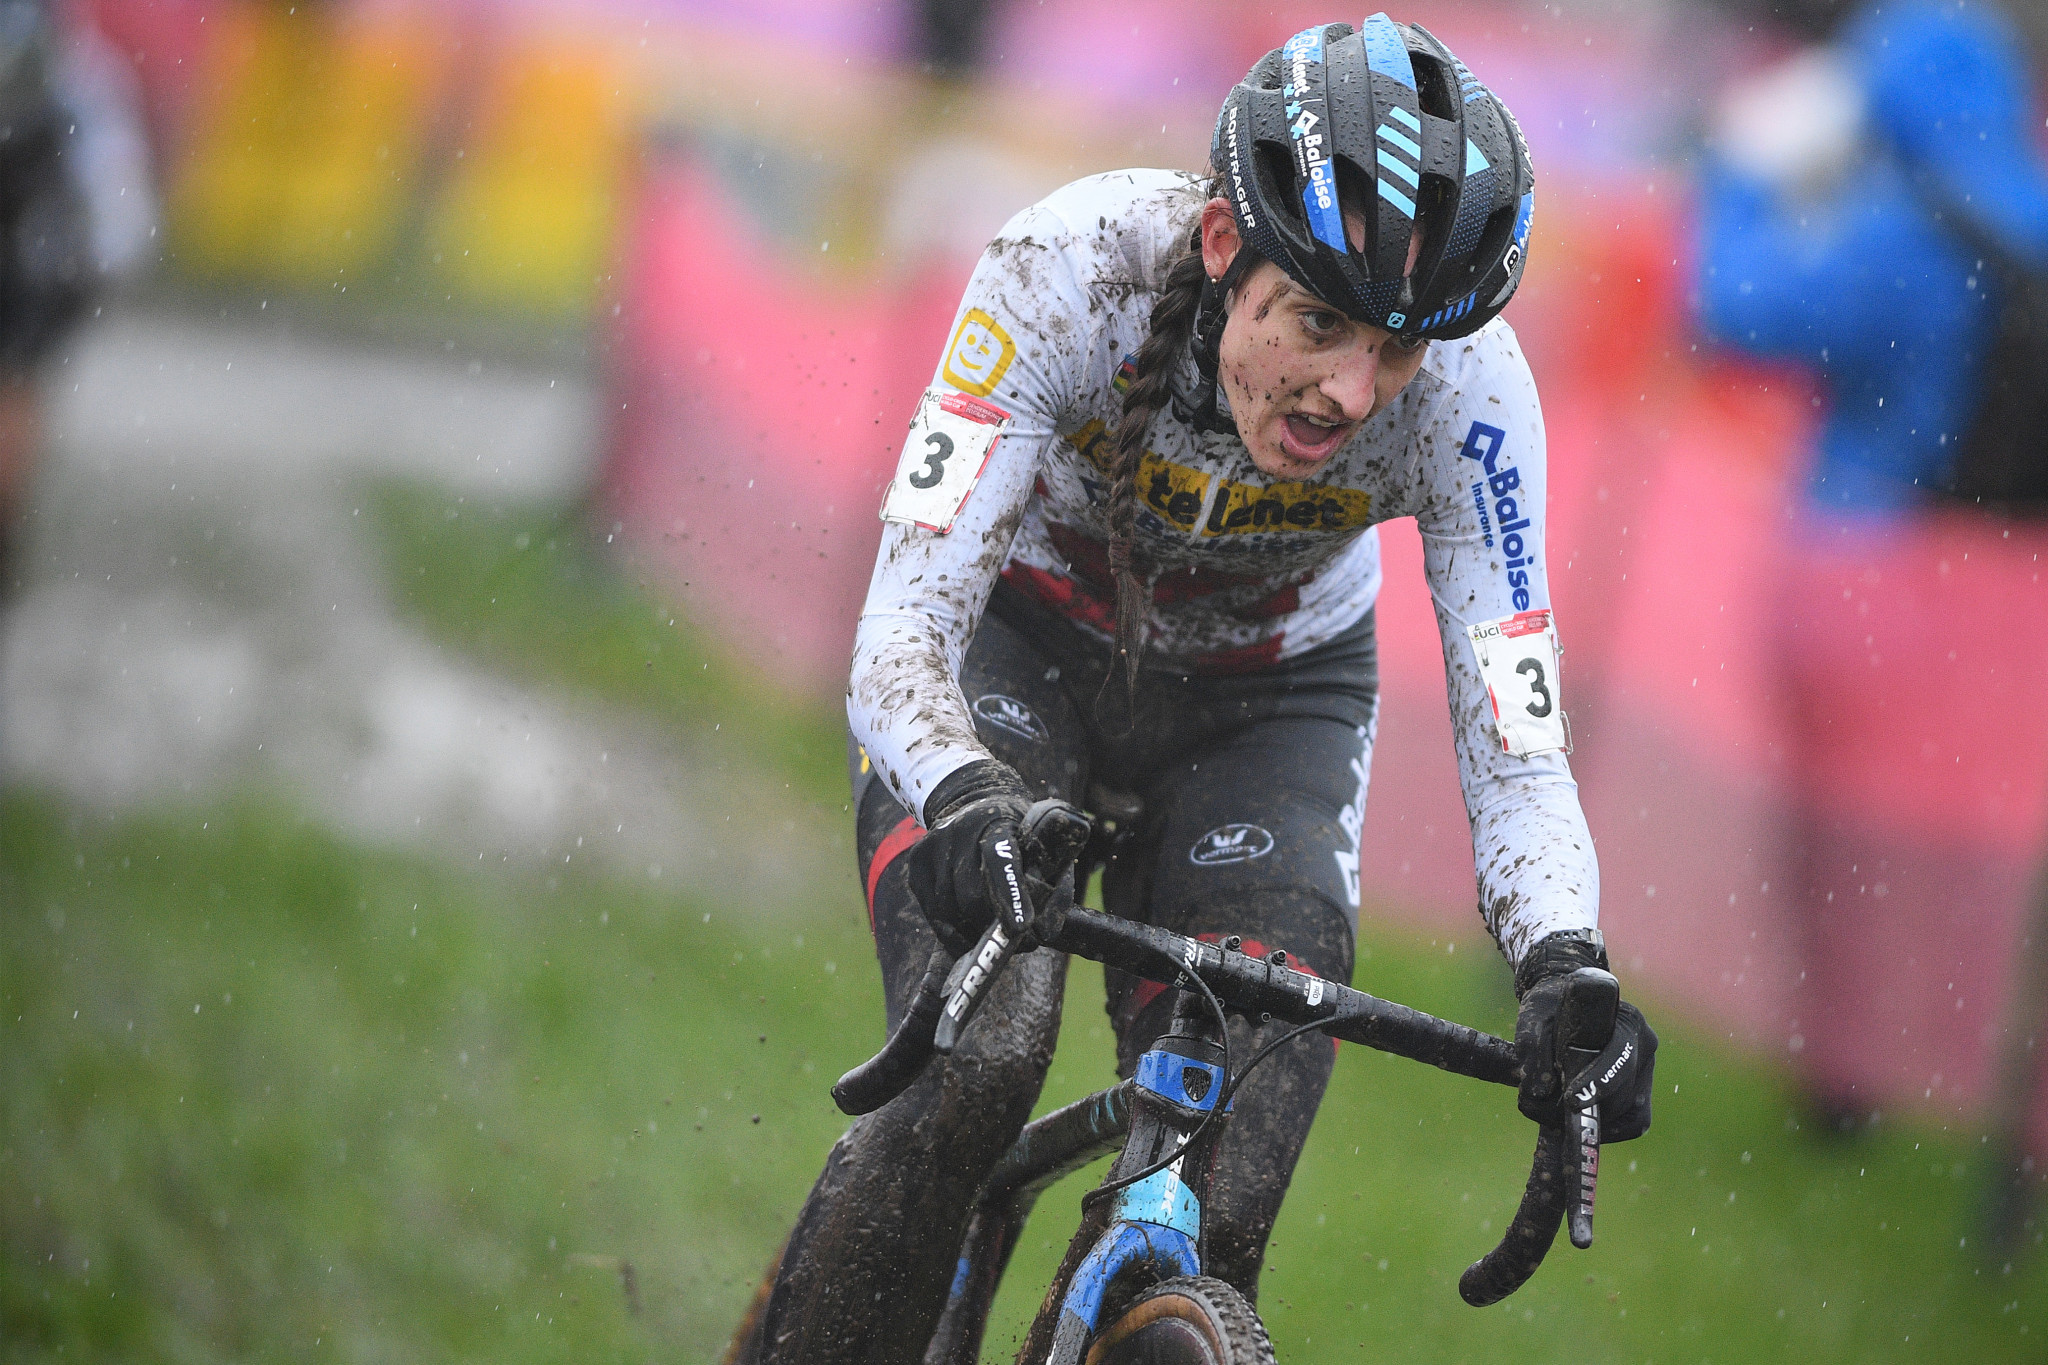 Brand has chance to win women's title as UCI Cyclo-Cross World Cup heads to Hulst